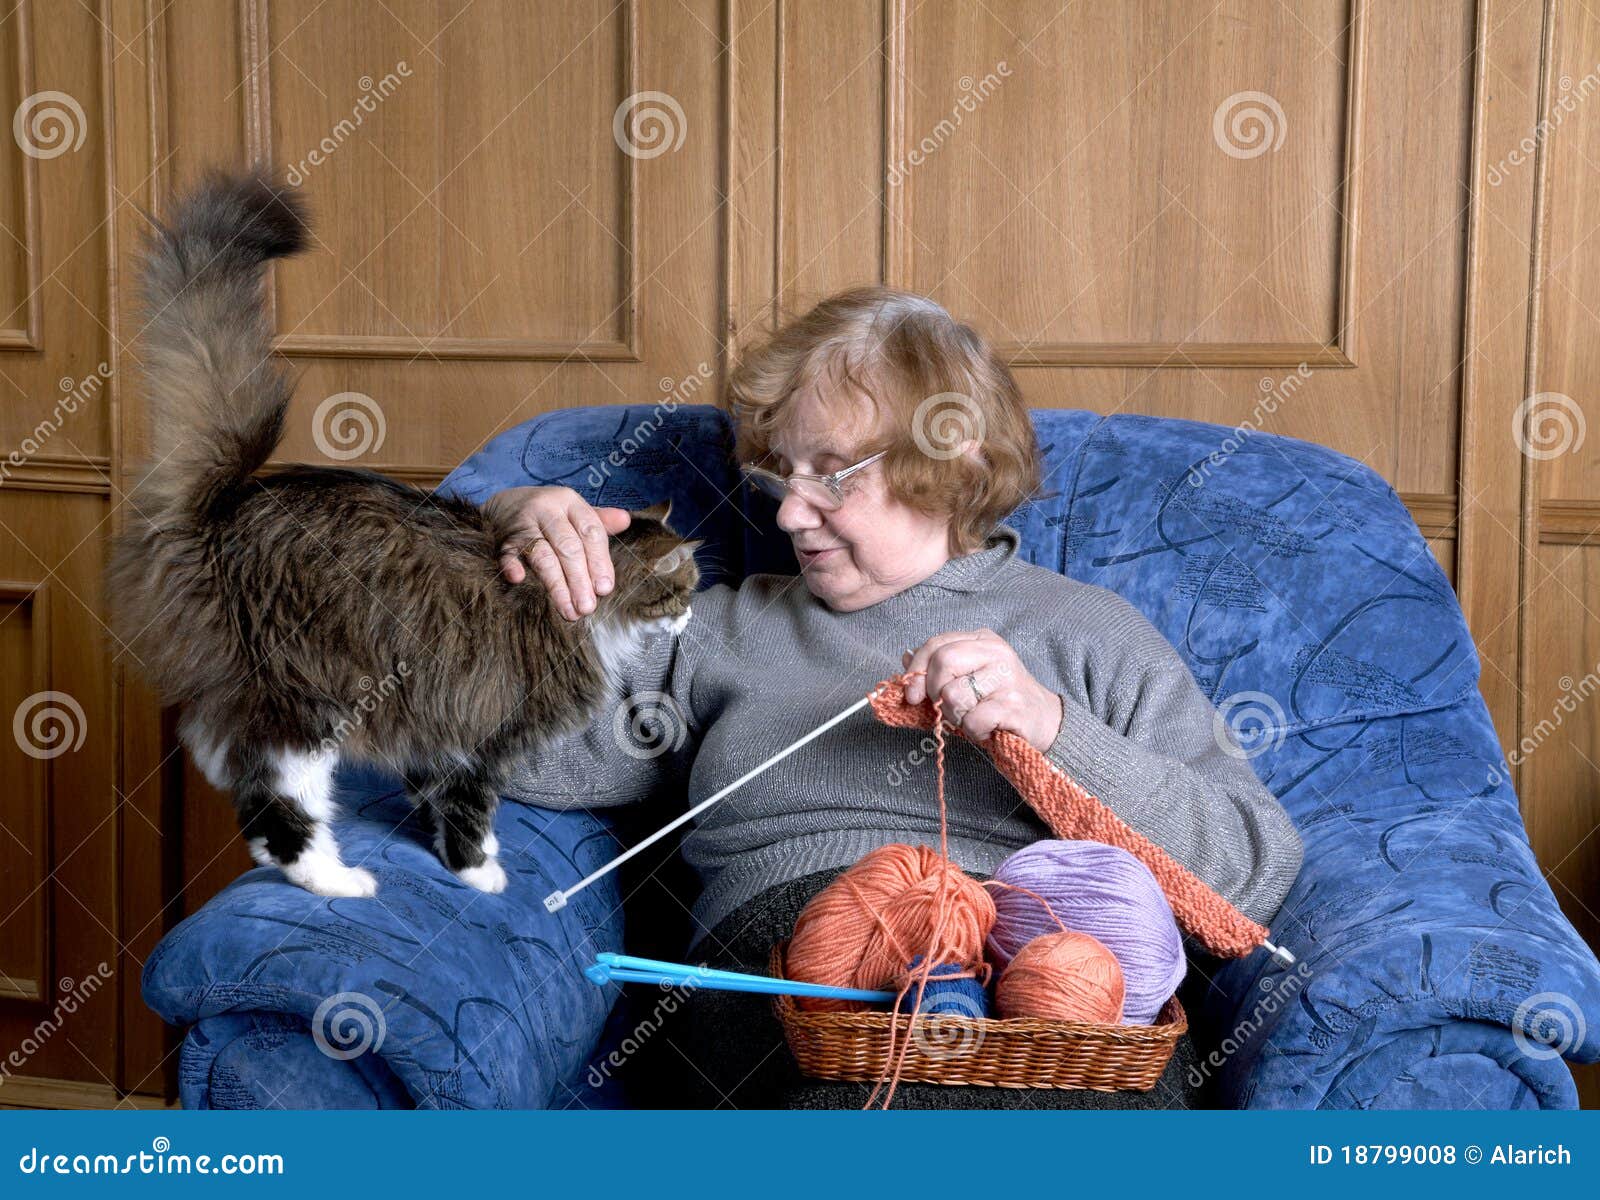 The Old Woman Stroke A Cat Royalty Free Stock Photos Image 18799008